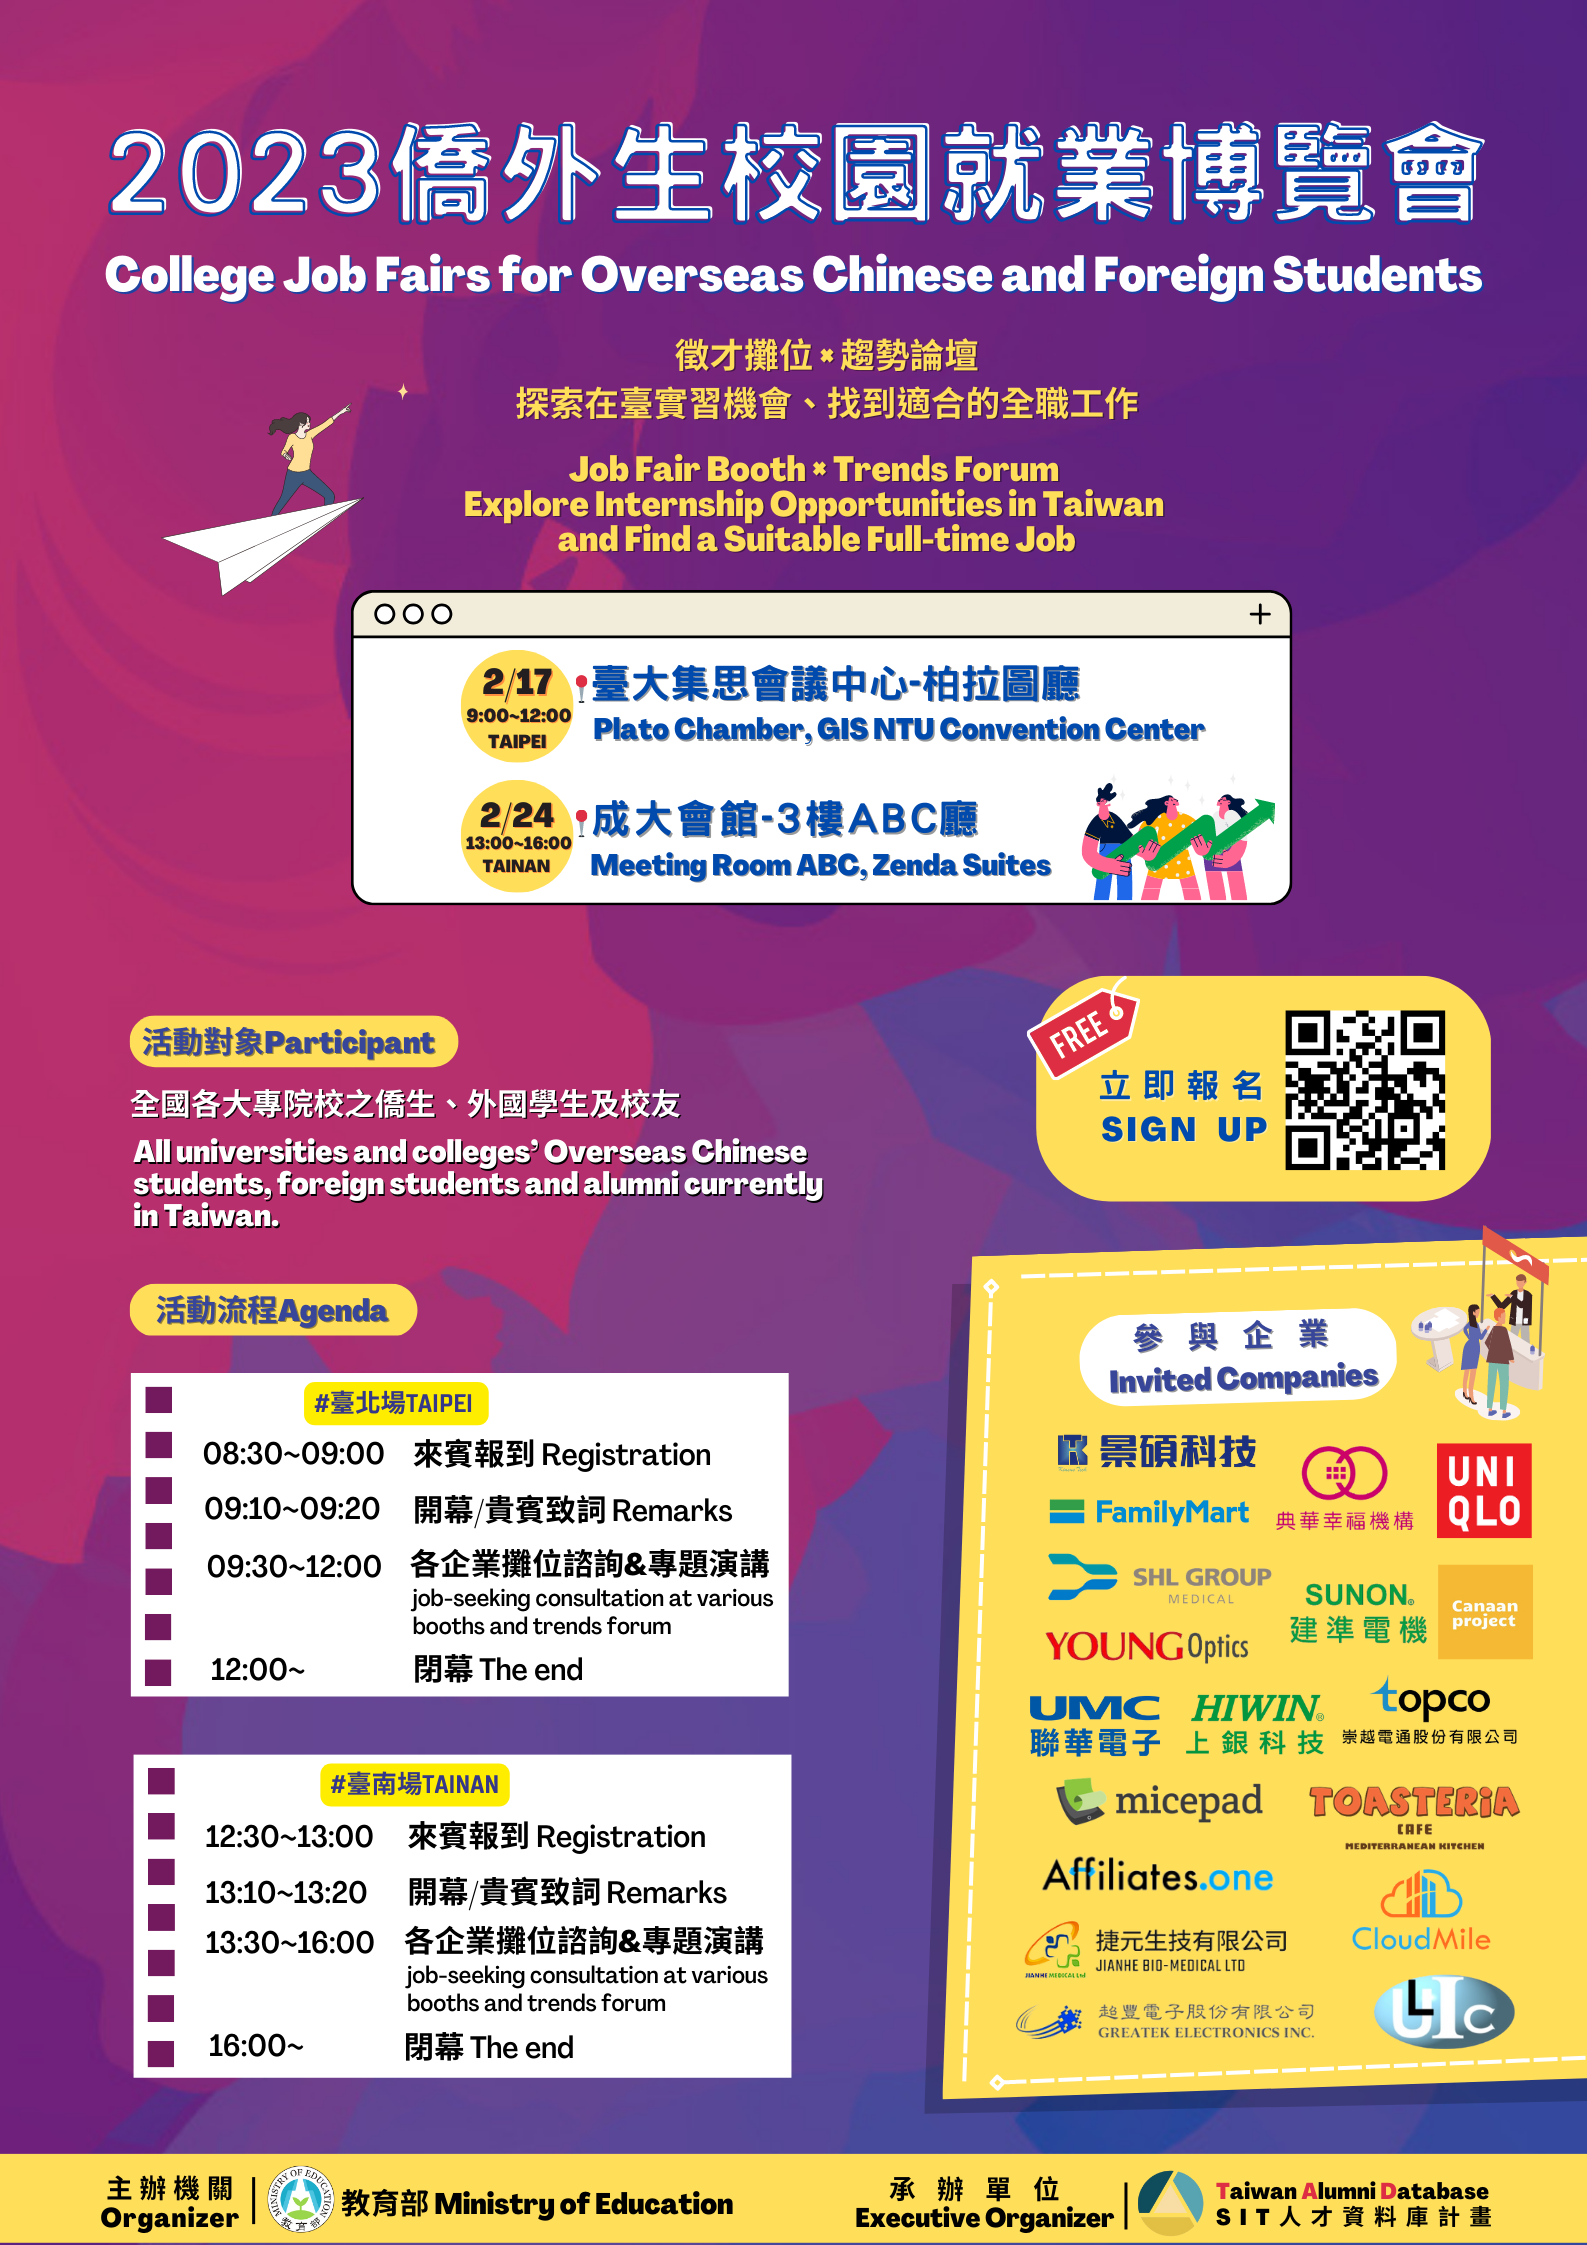 College Job Fairs for Overseas Chinese and Foreign Students